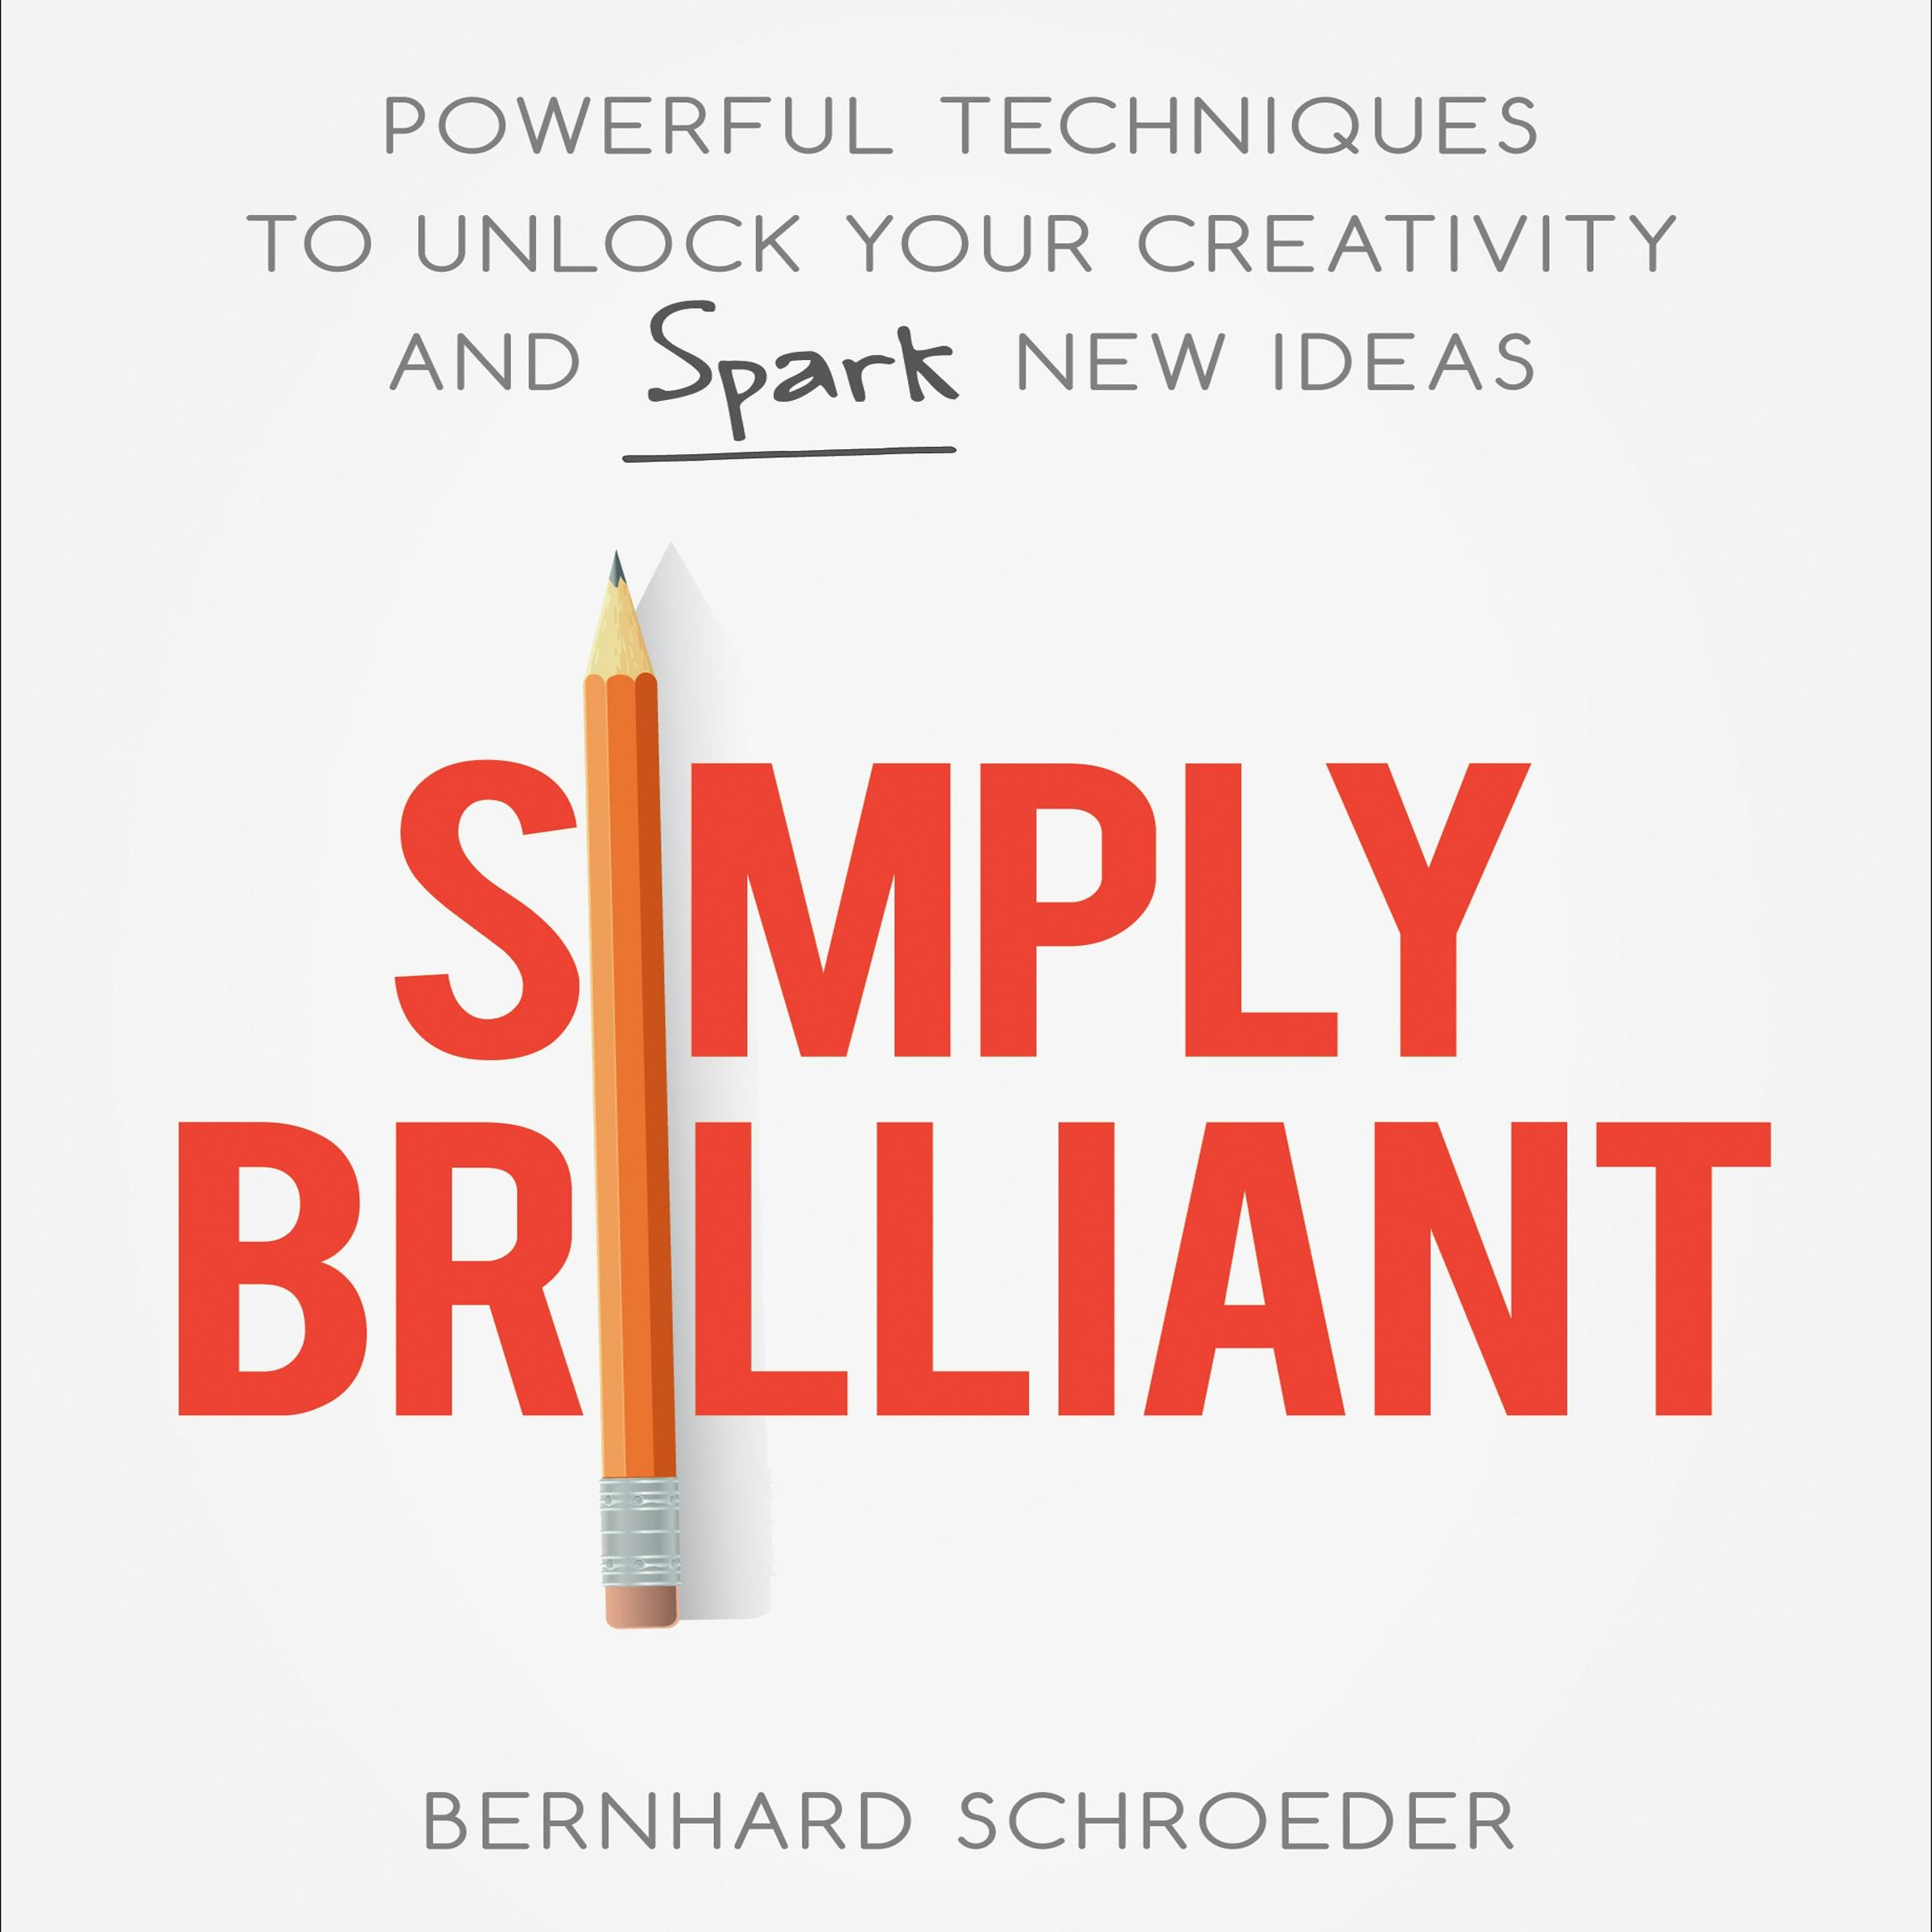 Simply Brilliant: Powerful Techniques to Unlock Your Creativity and Spark New Ideas - Bernhard Schroeder